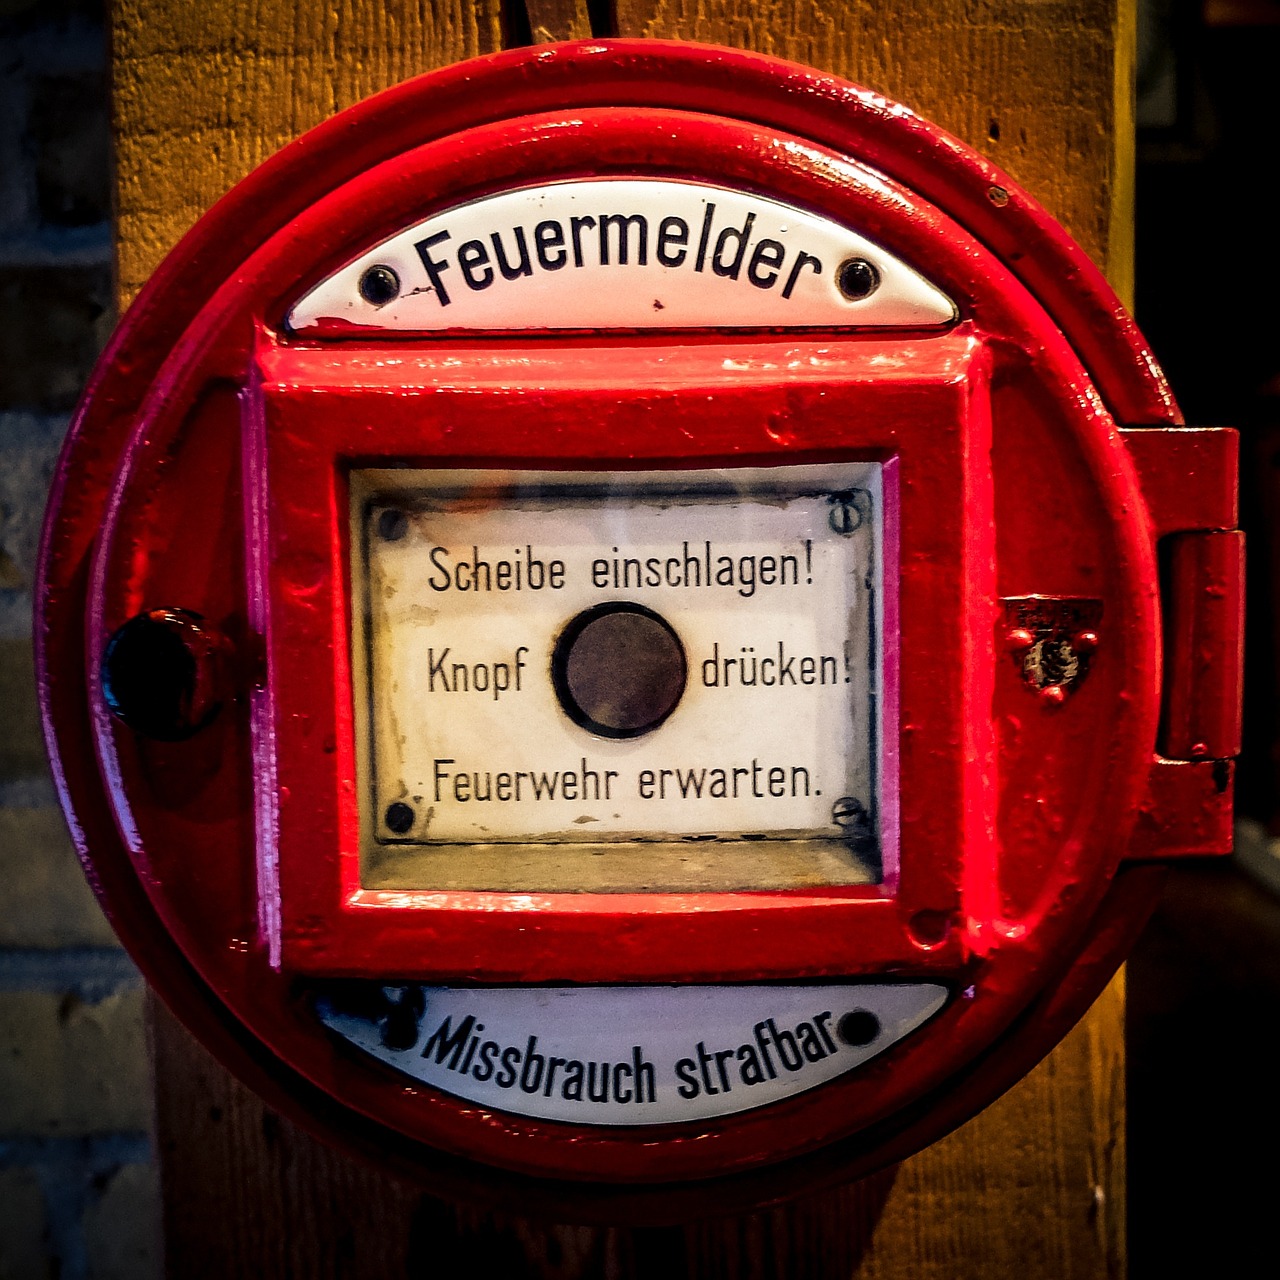 a red fire hydrant sitting next to a brick wall, a stock photo, by Thomas Häfner, flickr, old experimentation cabinet, feedback loop, tram, molten